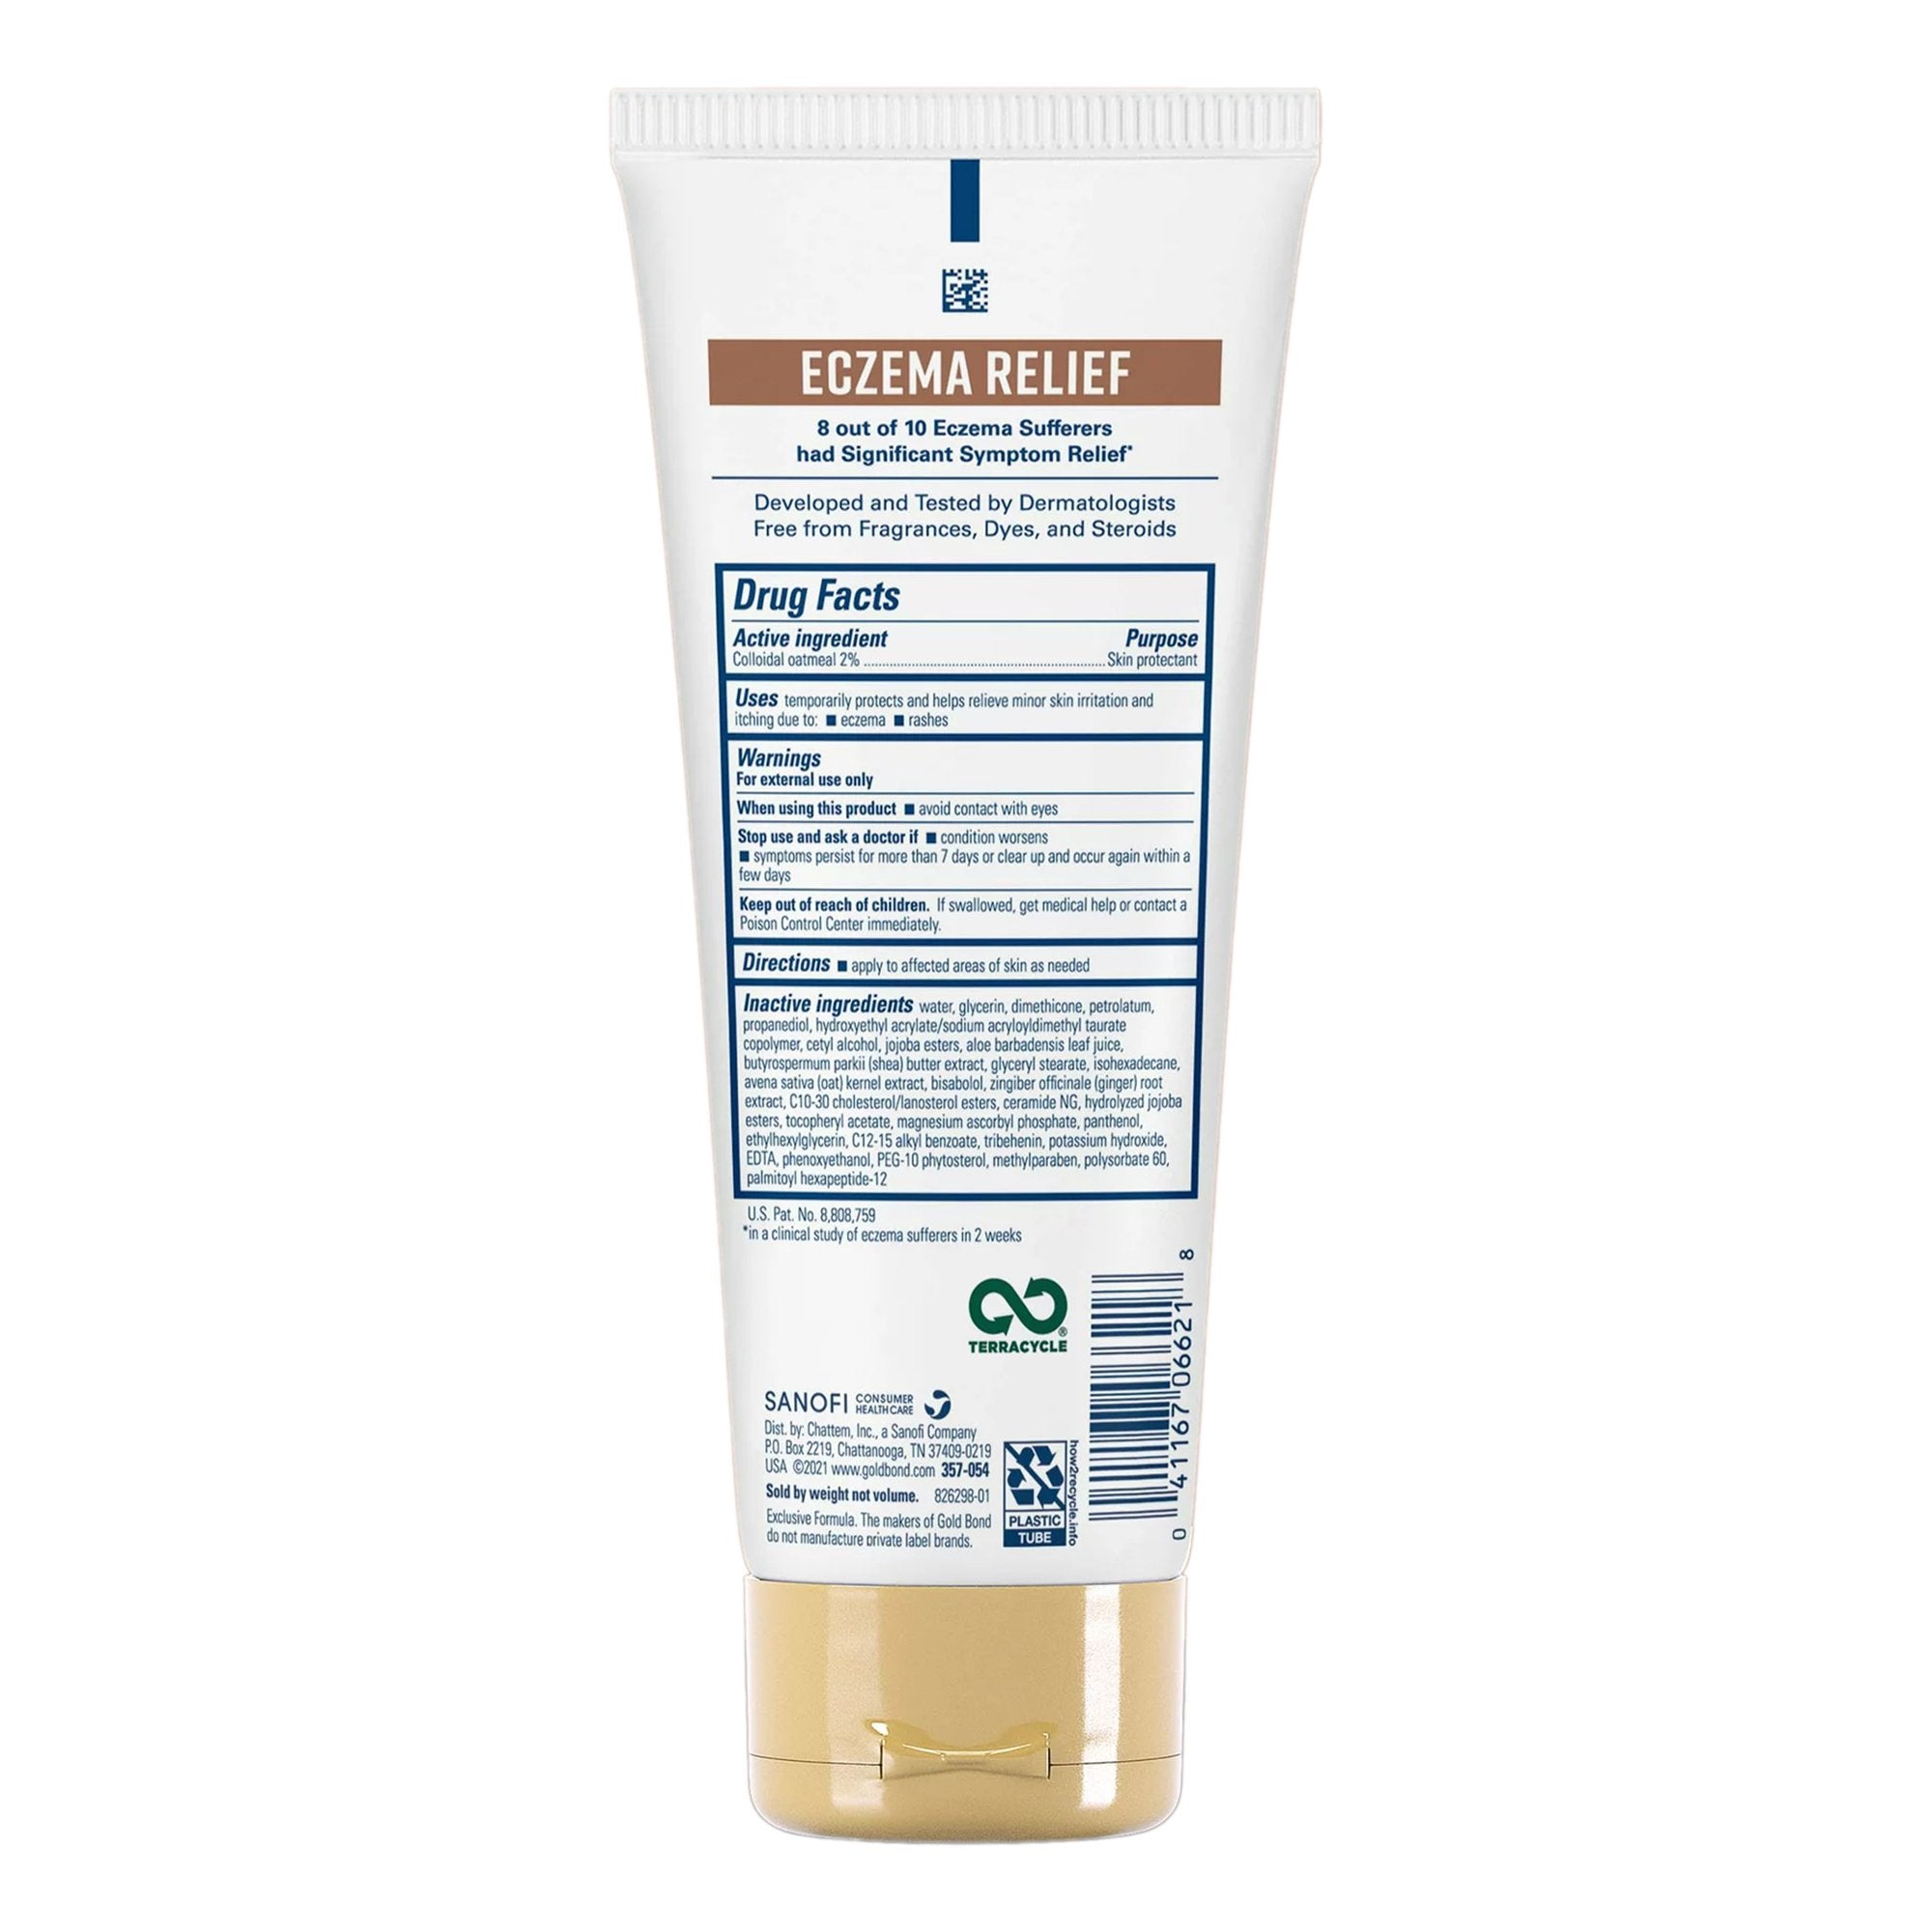 Skin Protectant Gold Bond® Eczema Relief 8 oz. Tube Unscented Cream